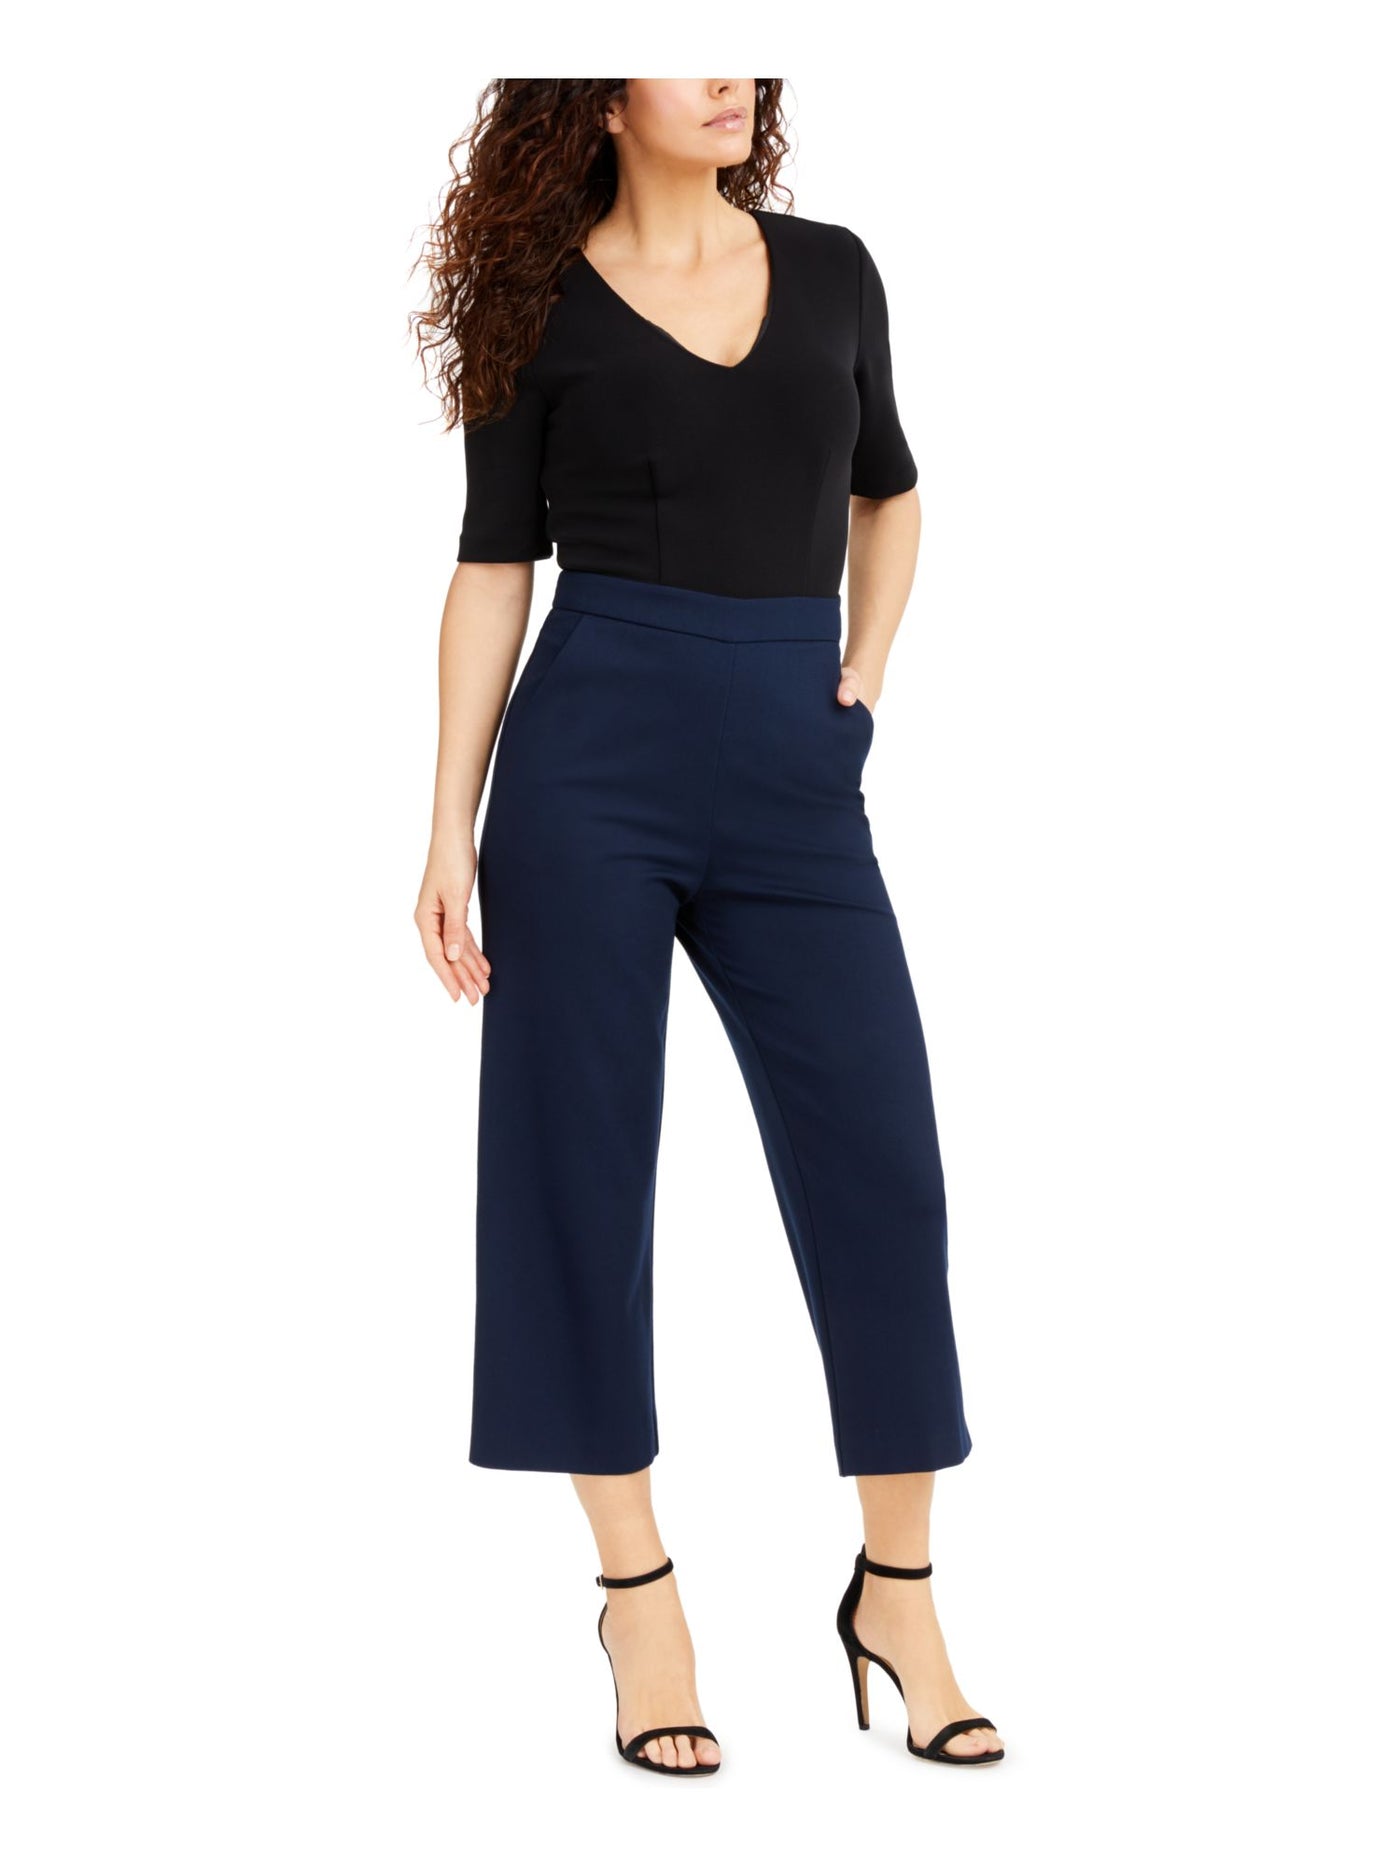 TRINA TURK Womens Navy Textured Pocketed Elbow Sleeves Color Block V Neck Wide Leg Jumpsuit 4